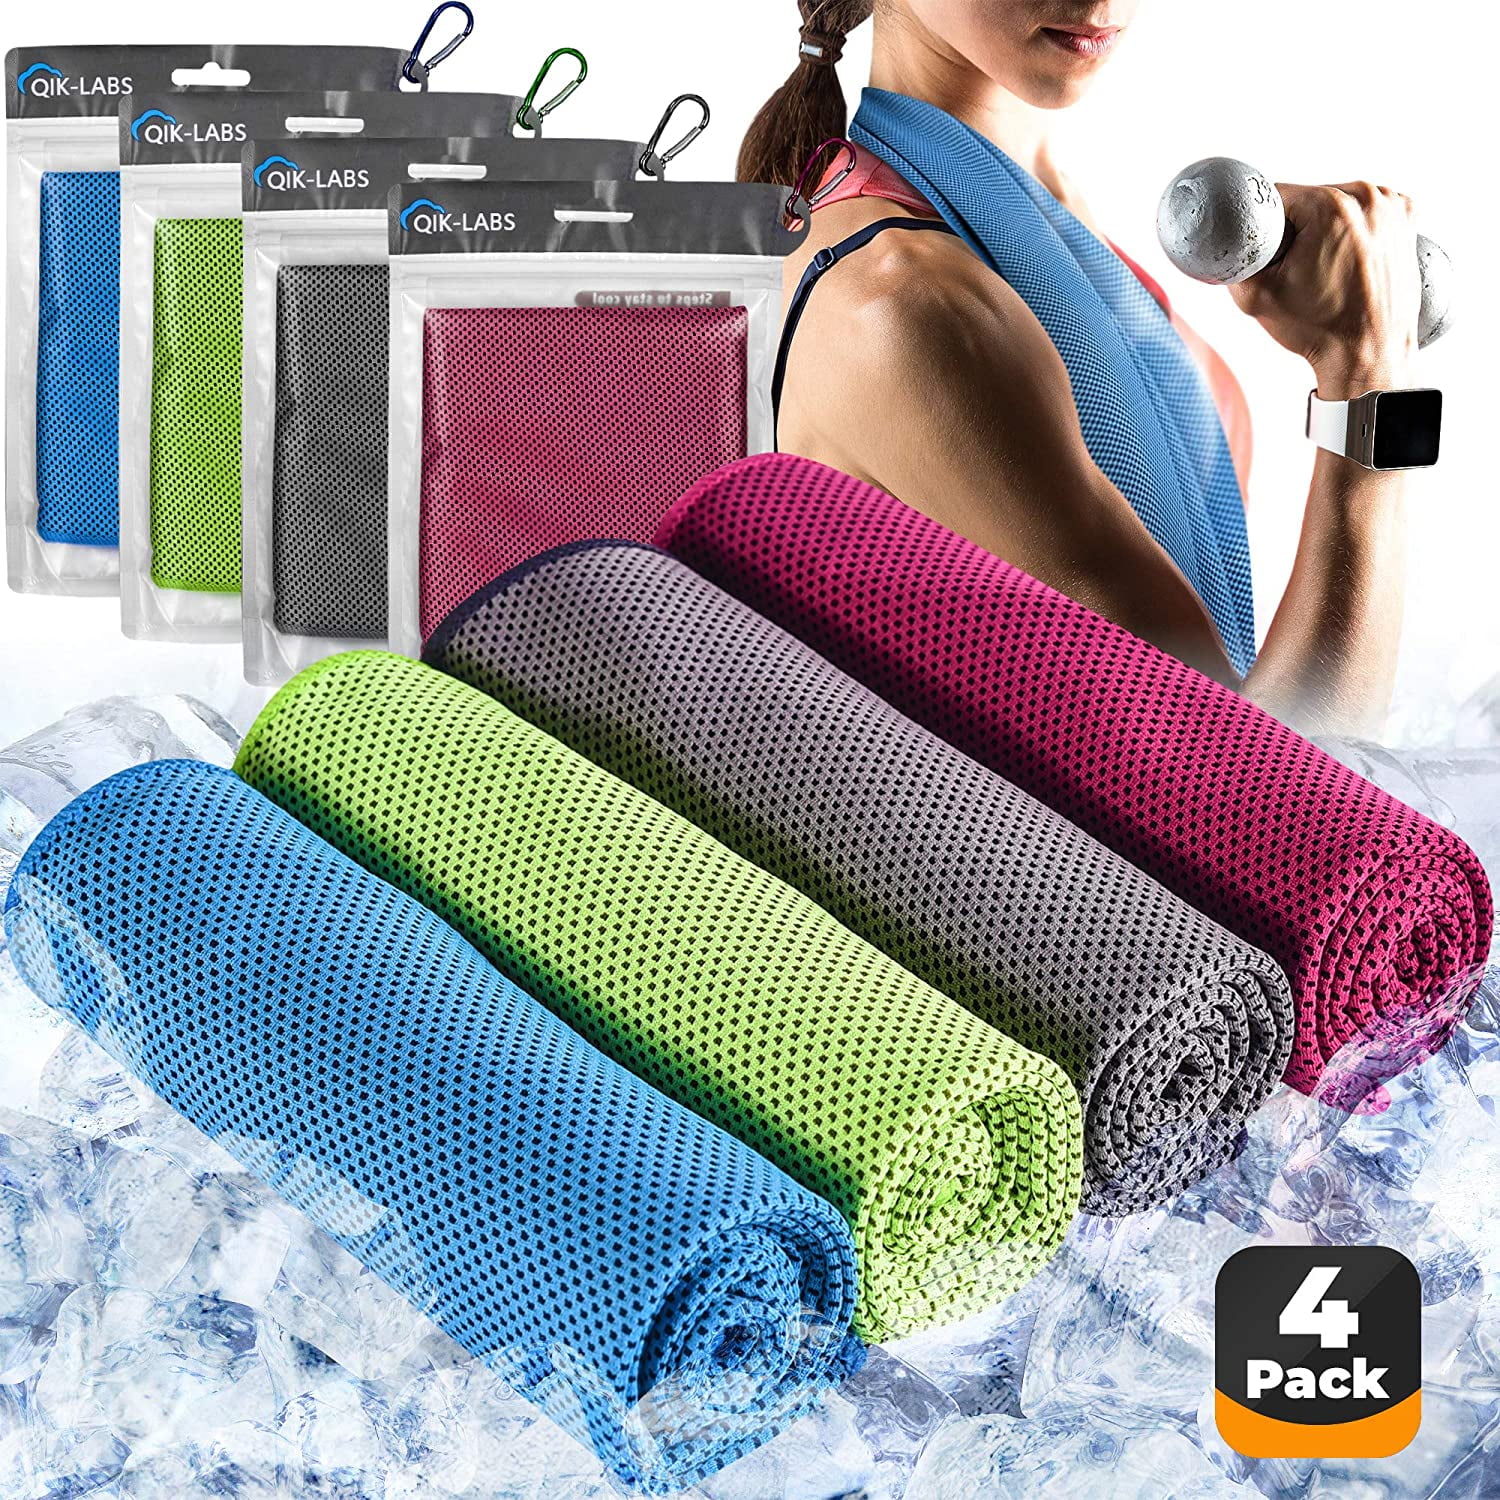 4pc Cooling Towel - Cooling Towels for Neck 4 pack - Ice Towel Chilly Cool  Towel for Athletes, Instant Chill Cooling Cloth as Cool Rags for Neck